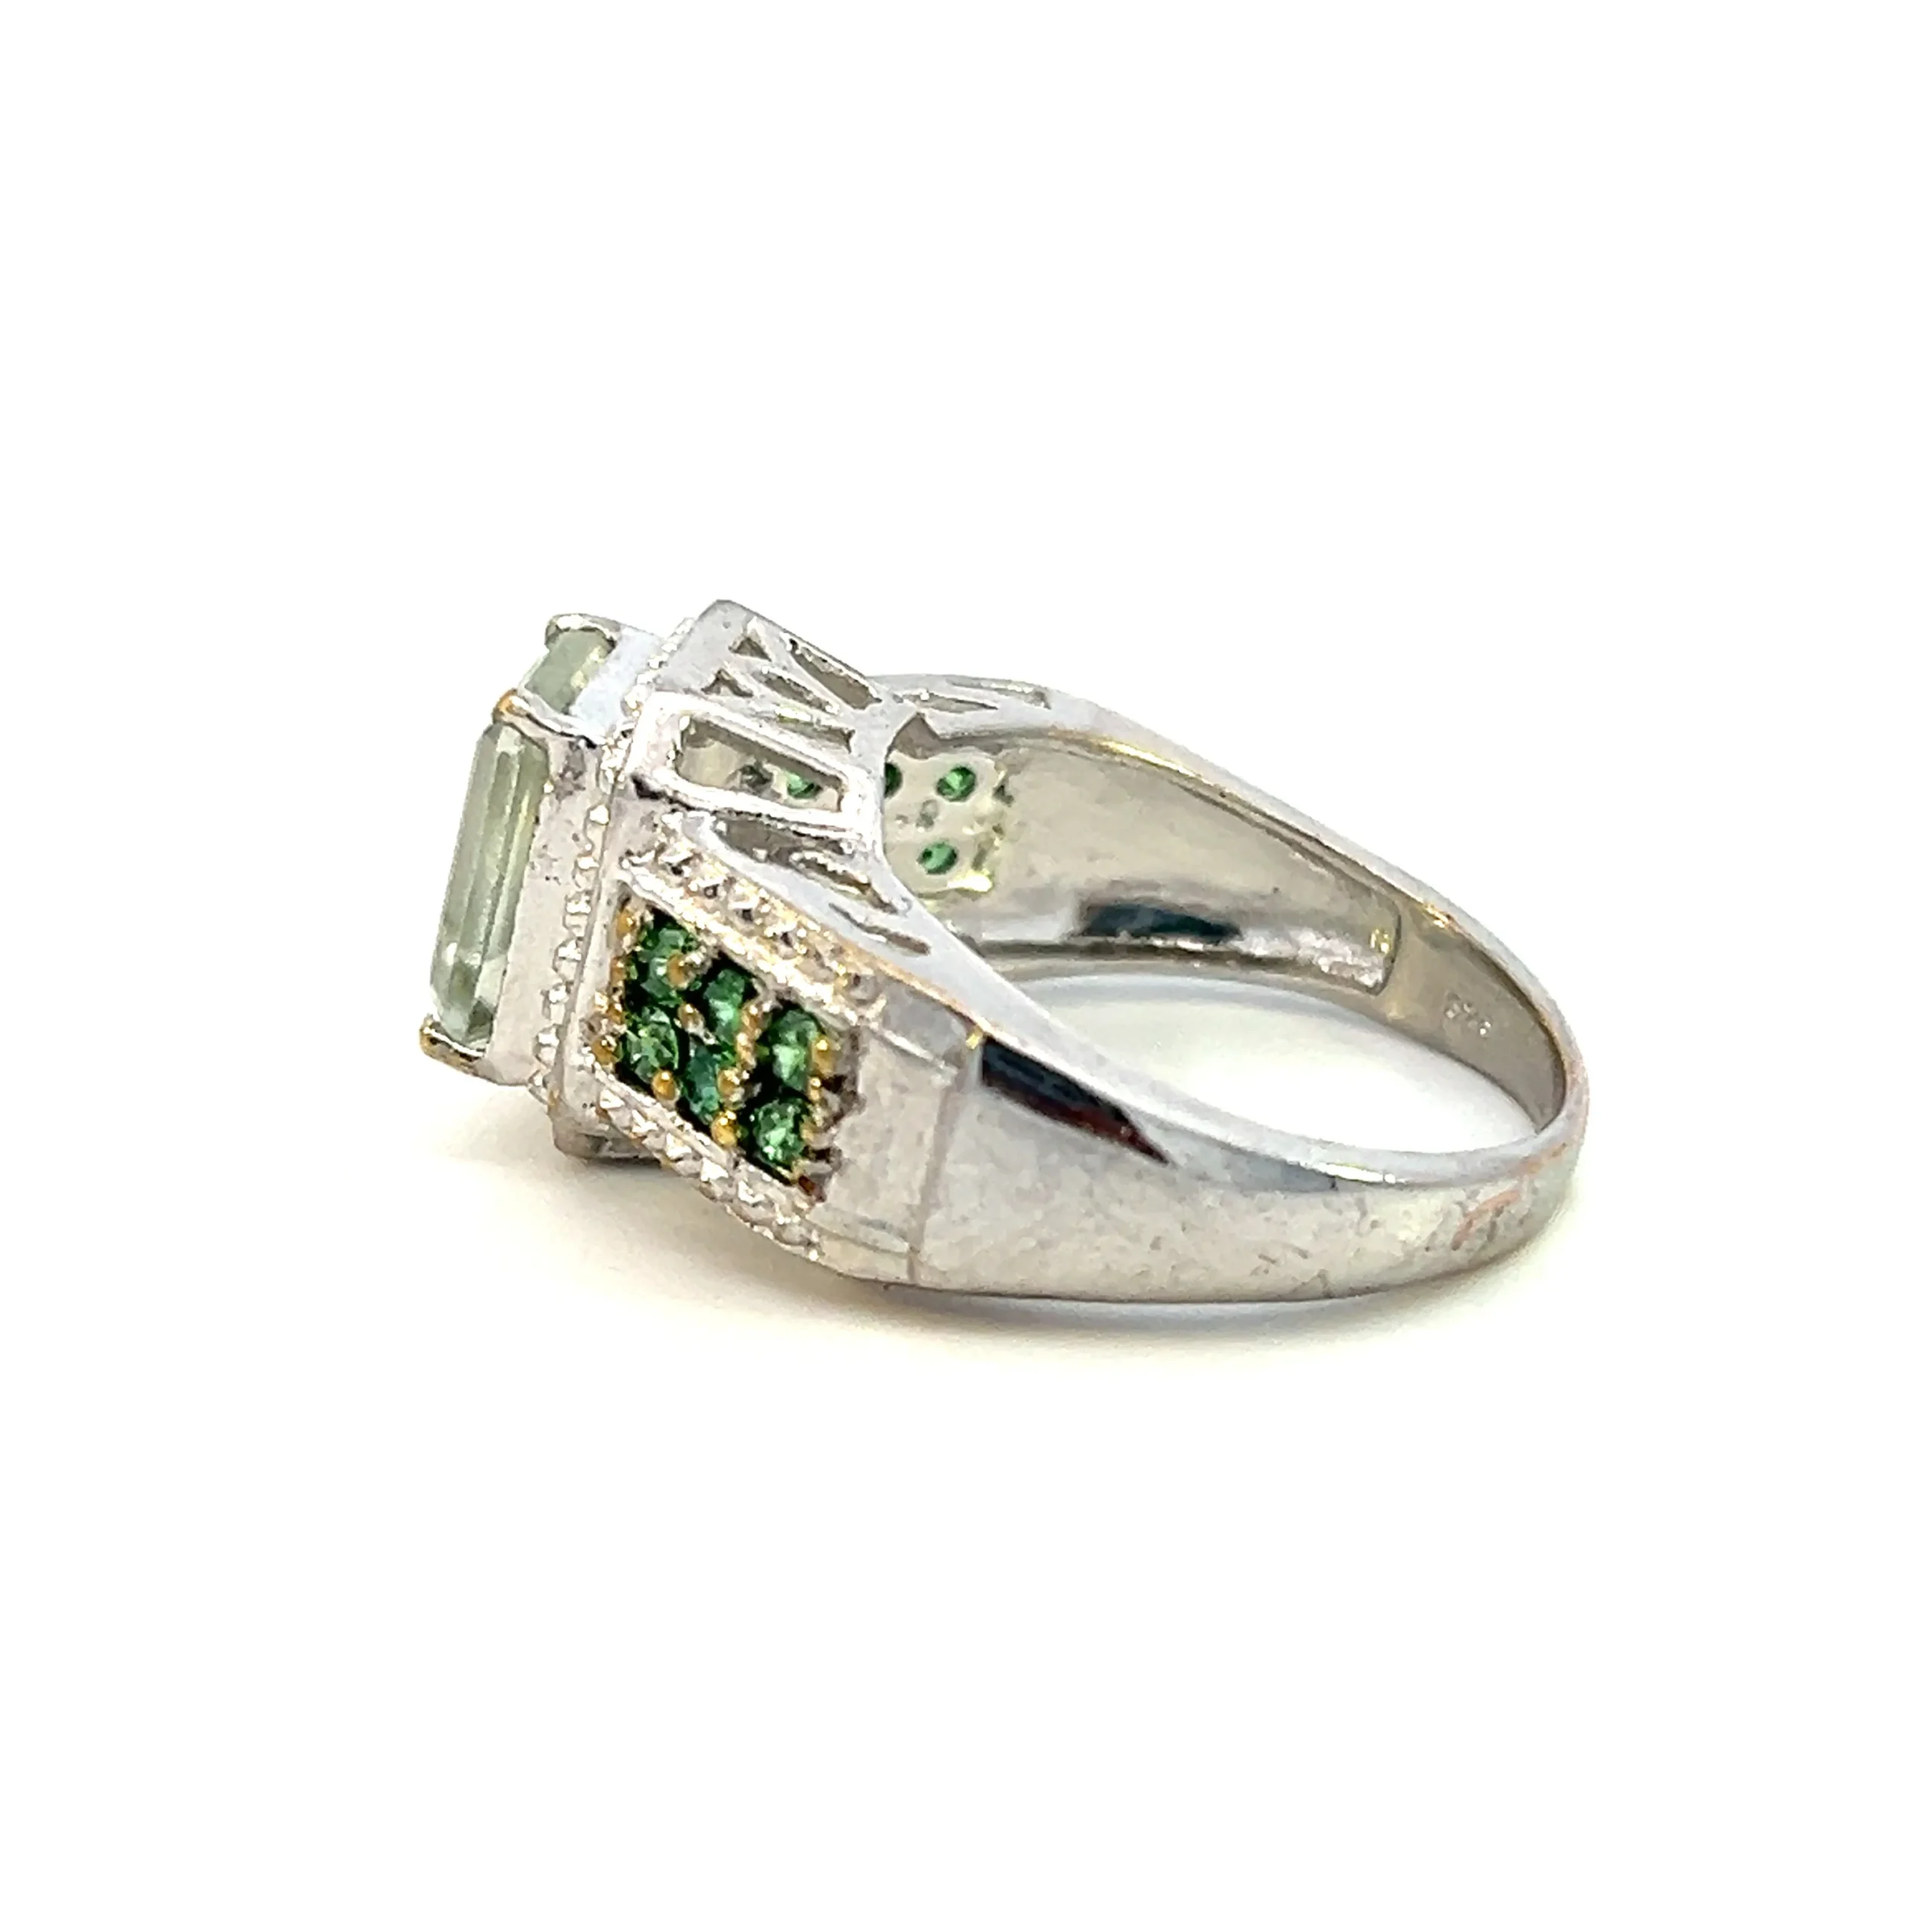 One estate sterling silver green quartz ring featuring emerald-cut green quartz inside a halo of silver bead work. The band features a double row of round green cubic zirconia with silver beadwork also on each edge of the cubic zirconia.